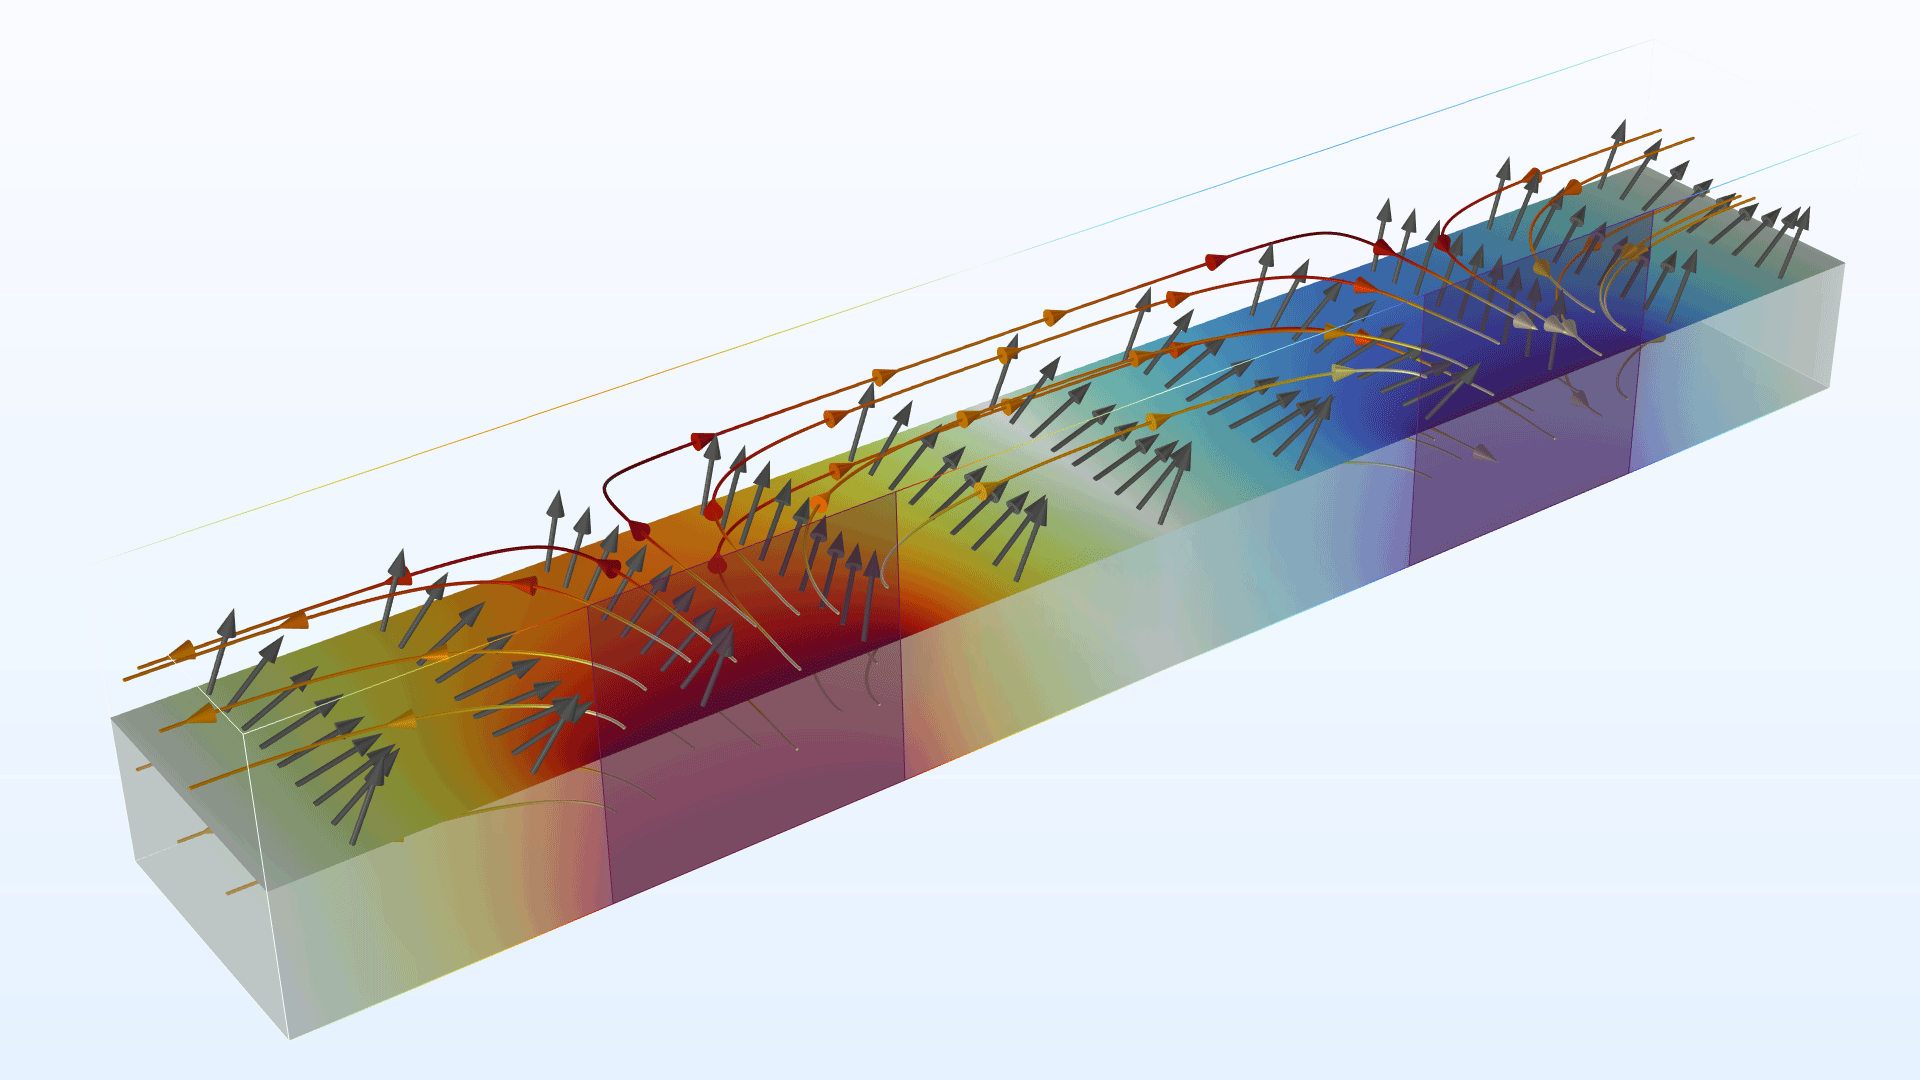 A nematic liquid crystal model showing the electric potential distribution in the Dipole color table and the electric field with a streamline plot in the Thermal color table.